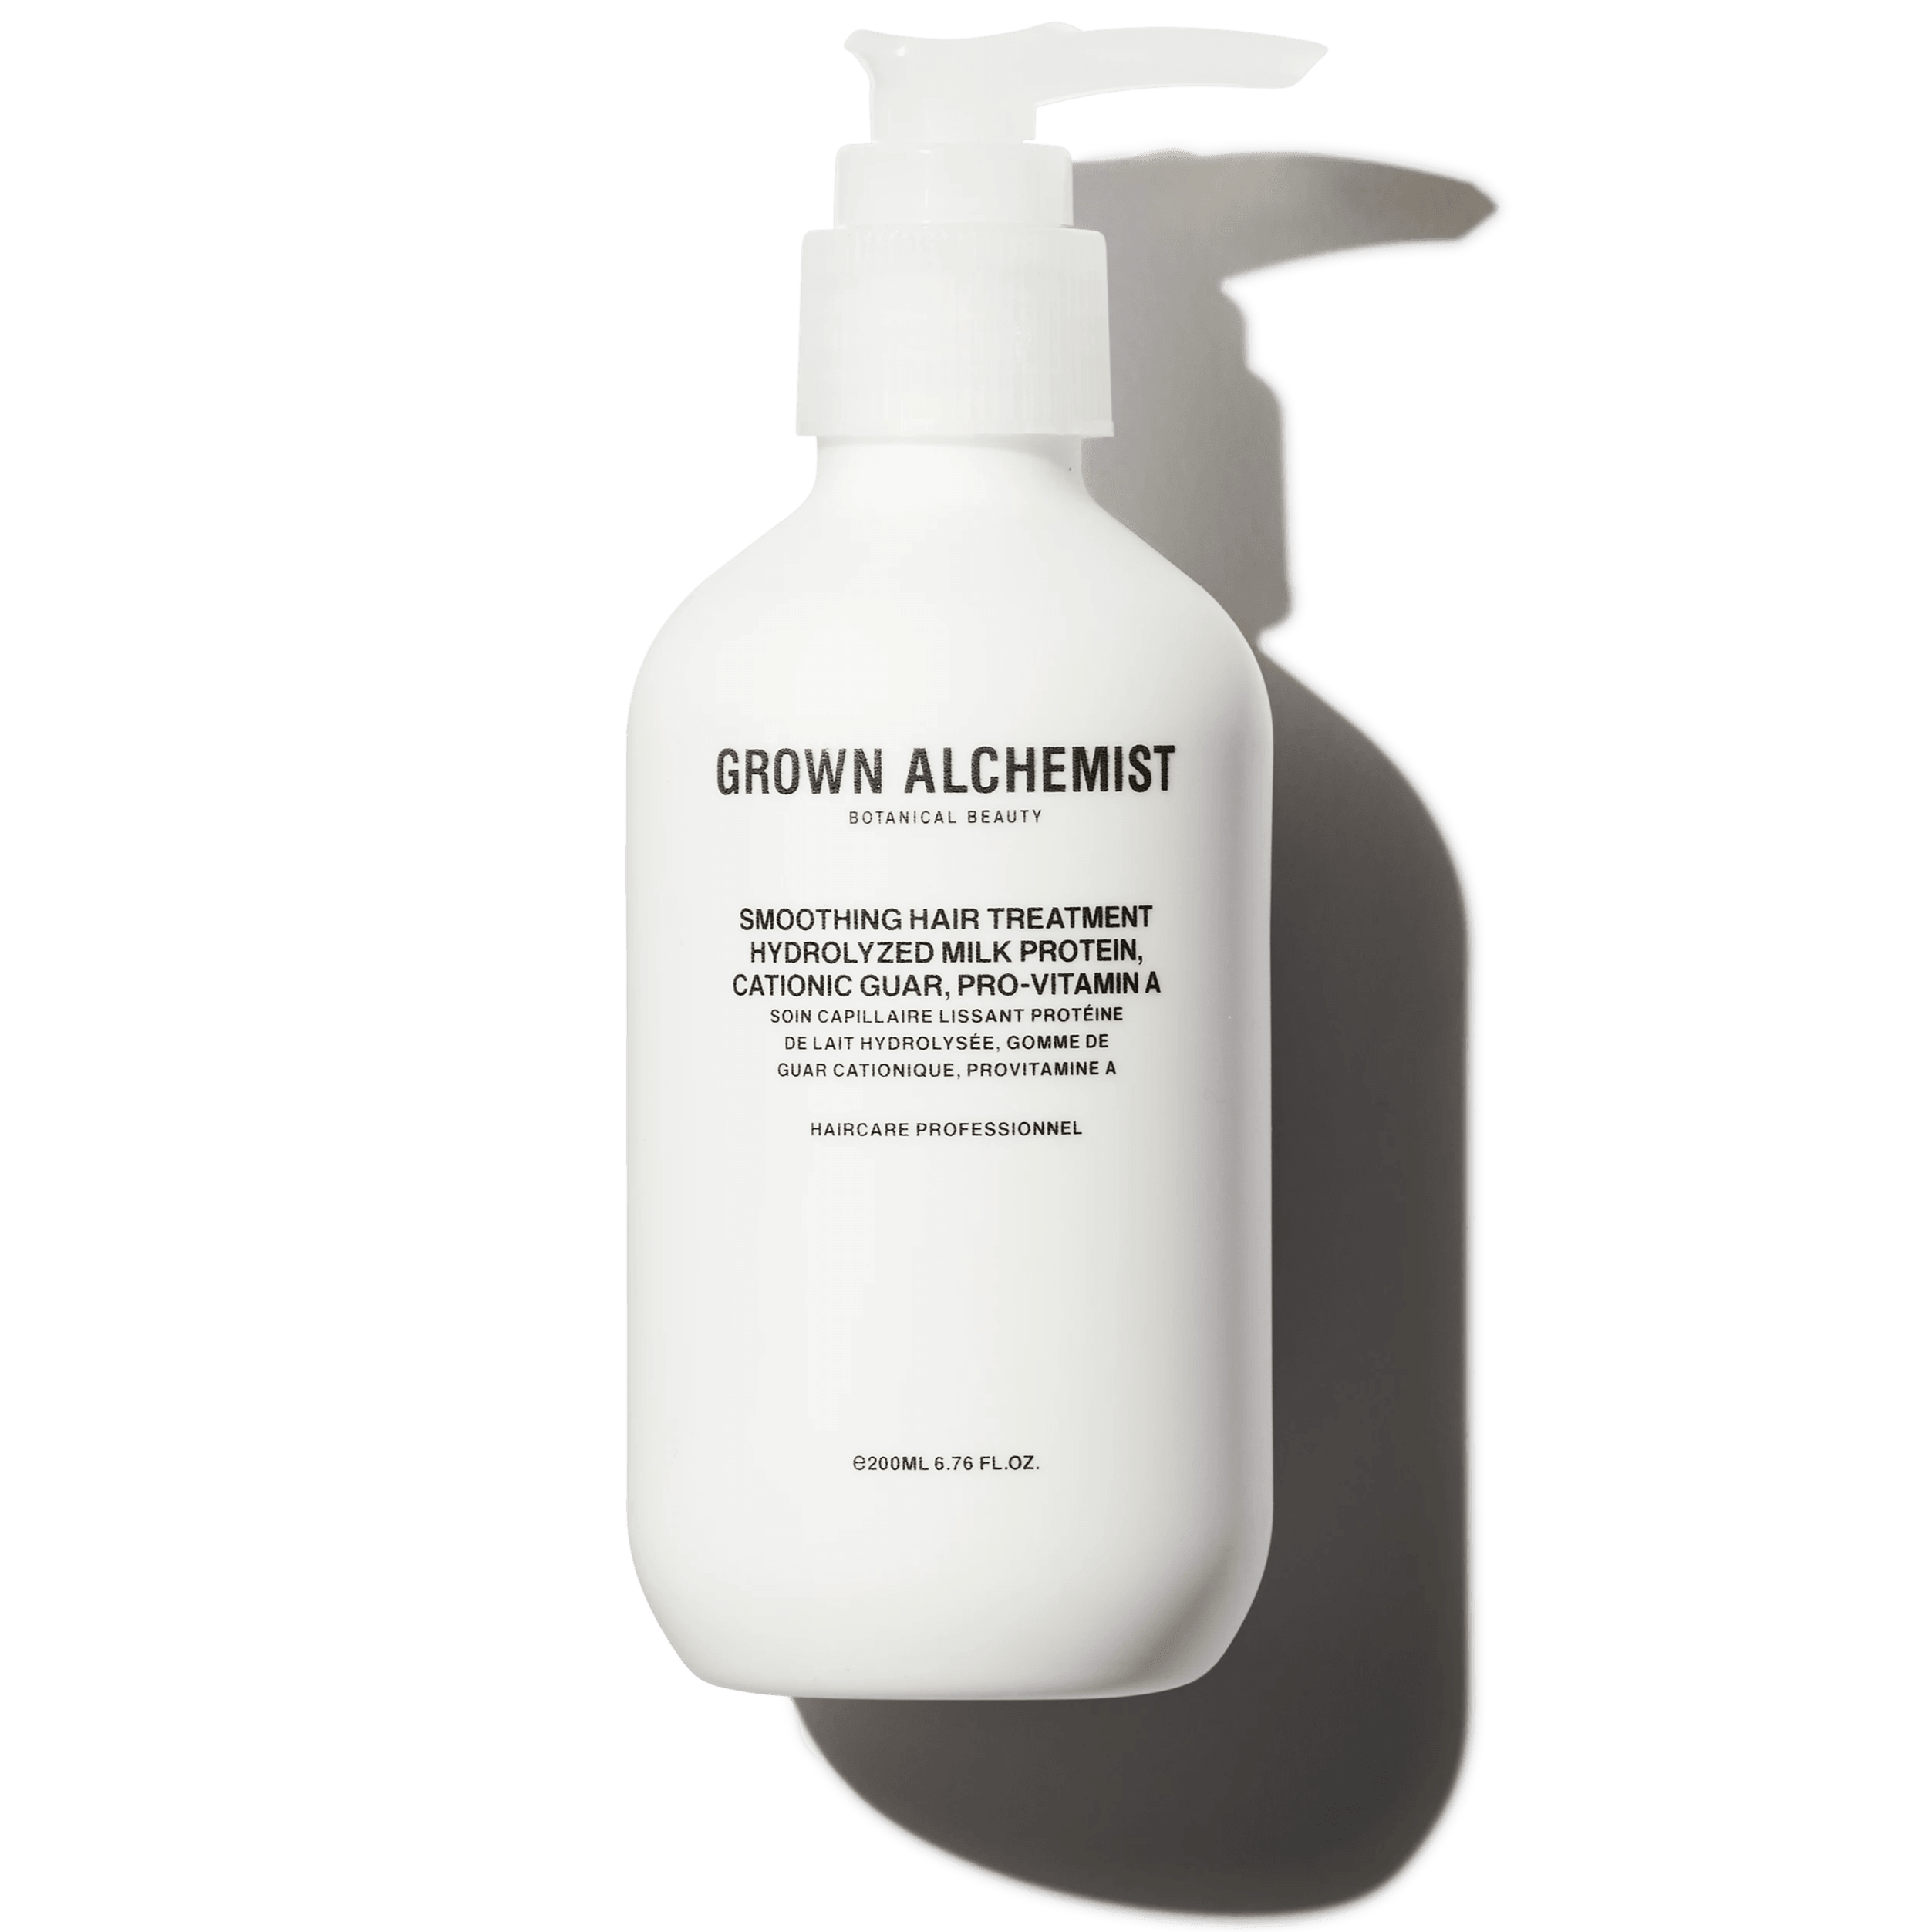 Grown Alchemist Smoothing Hair Treatment: Hydrolyzed Milk Protein, Cationic Guar, Pro-Vitamin A at Socialite Beauty Canada